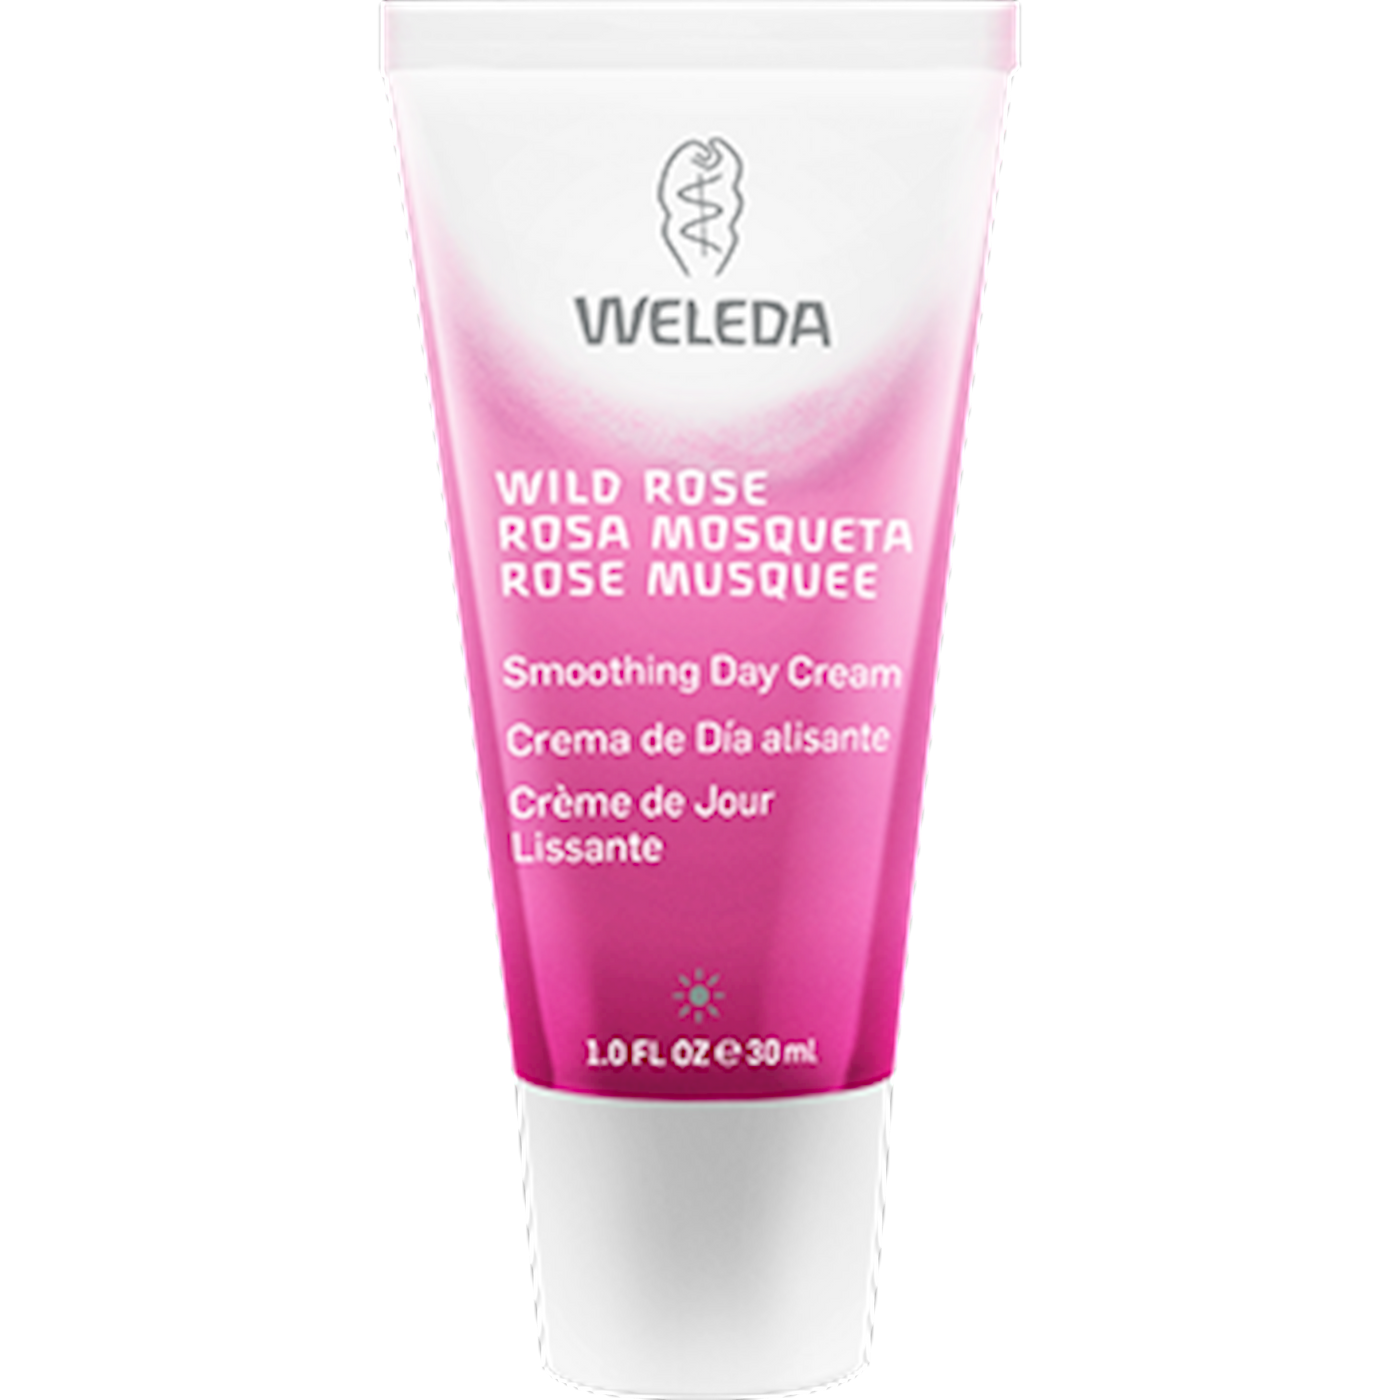 Wild Rose Smoothing Day Cream 1 fl oz Curated Wellness